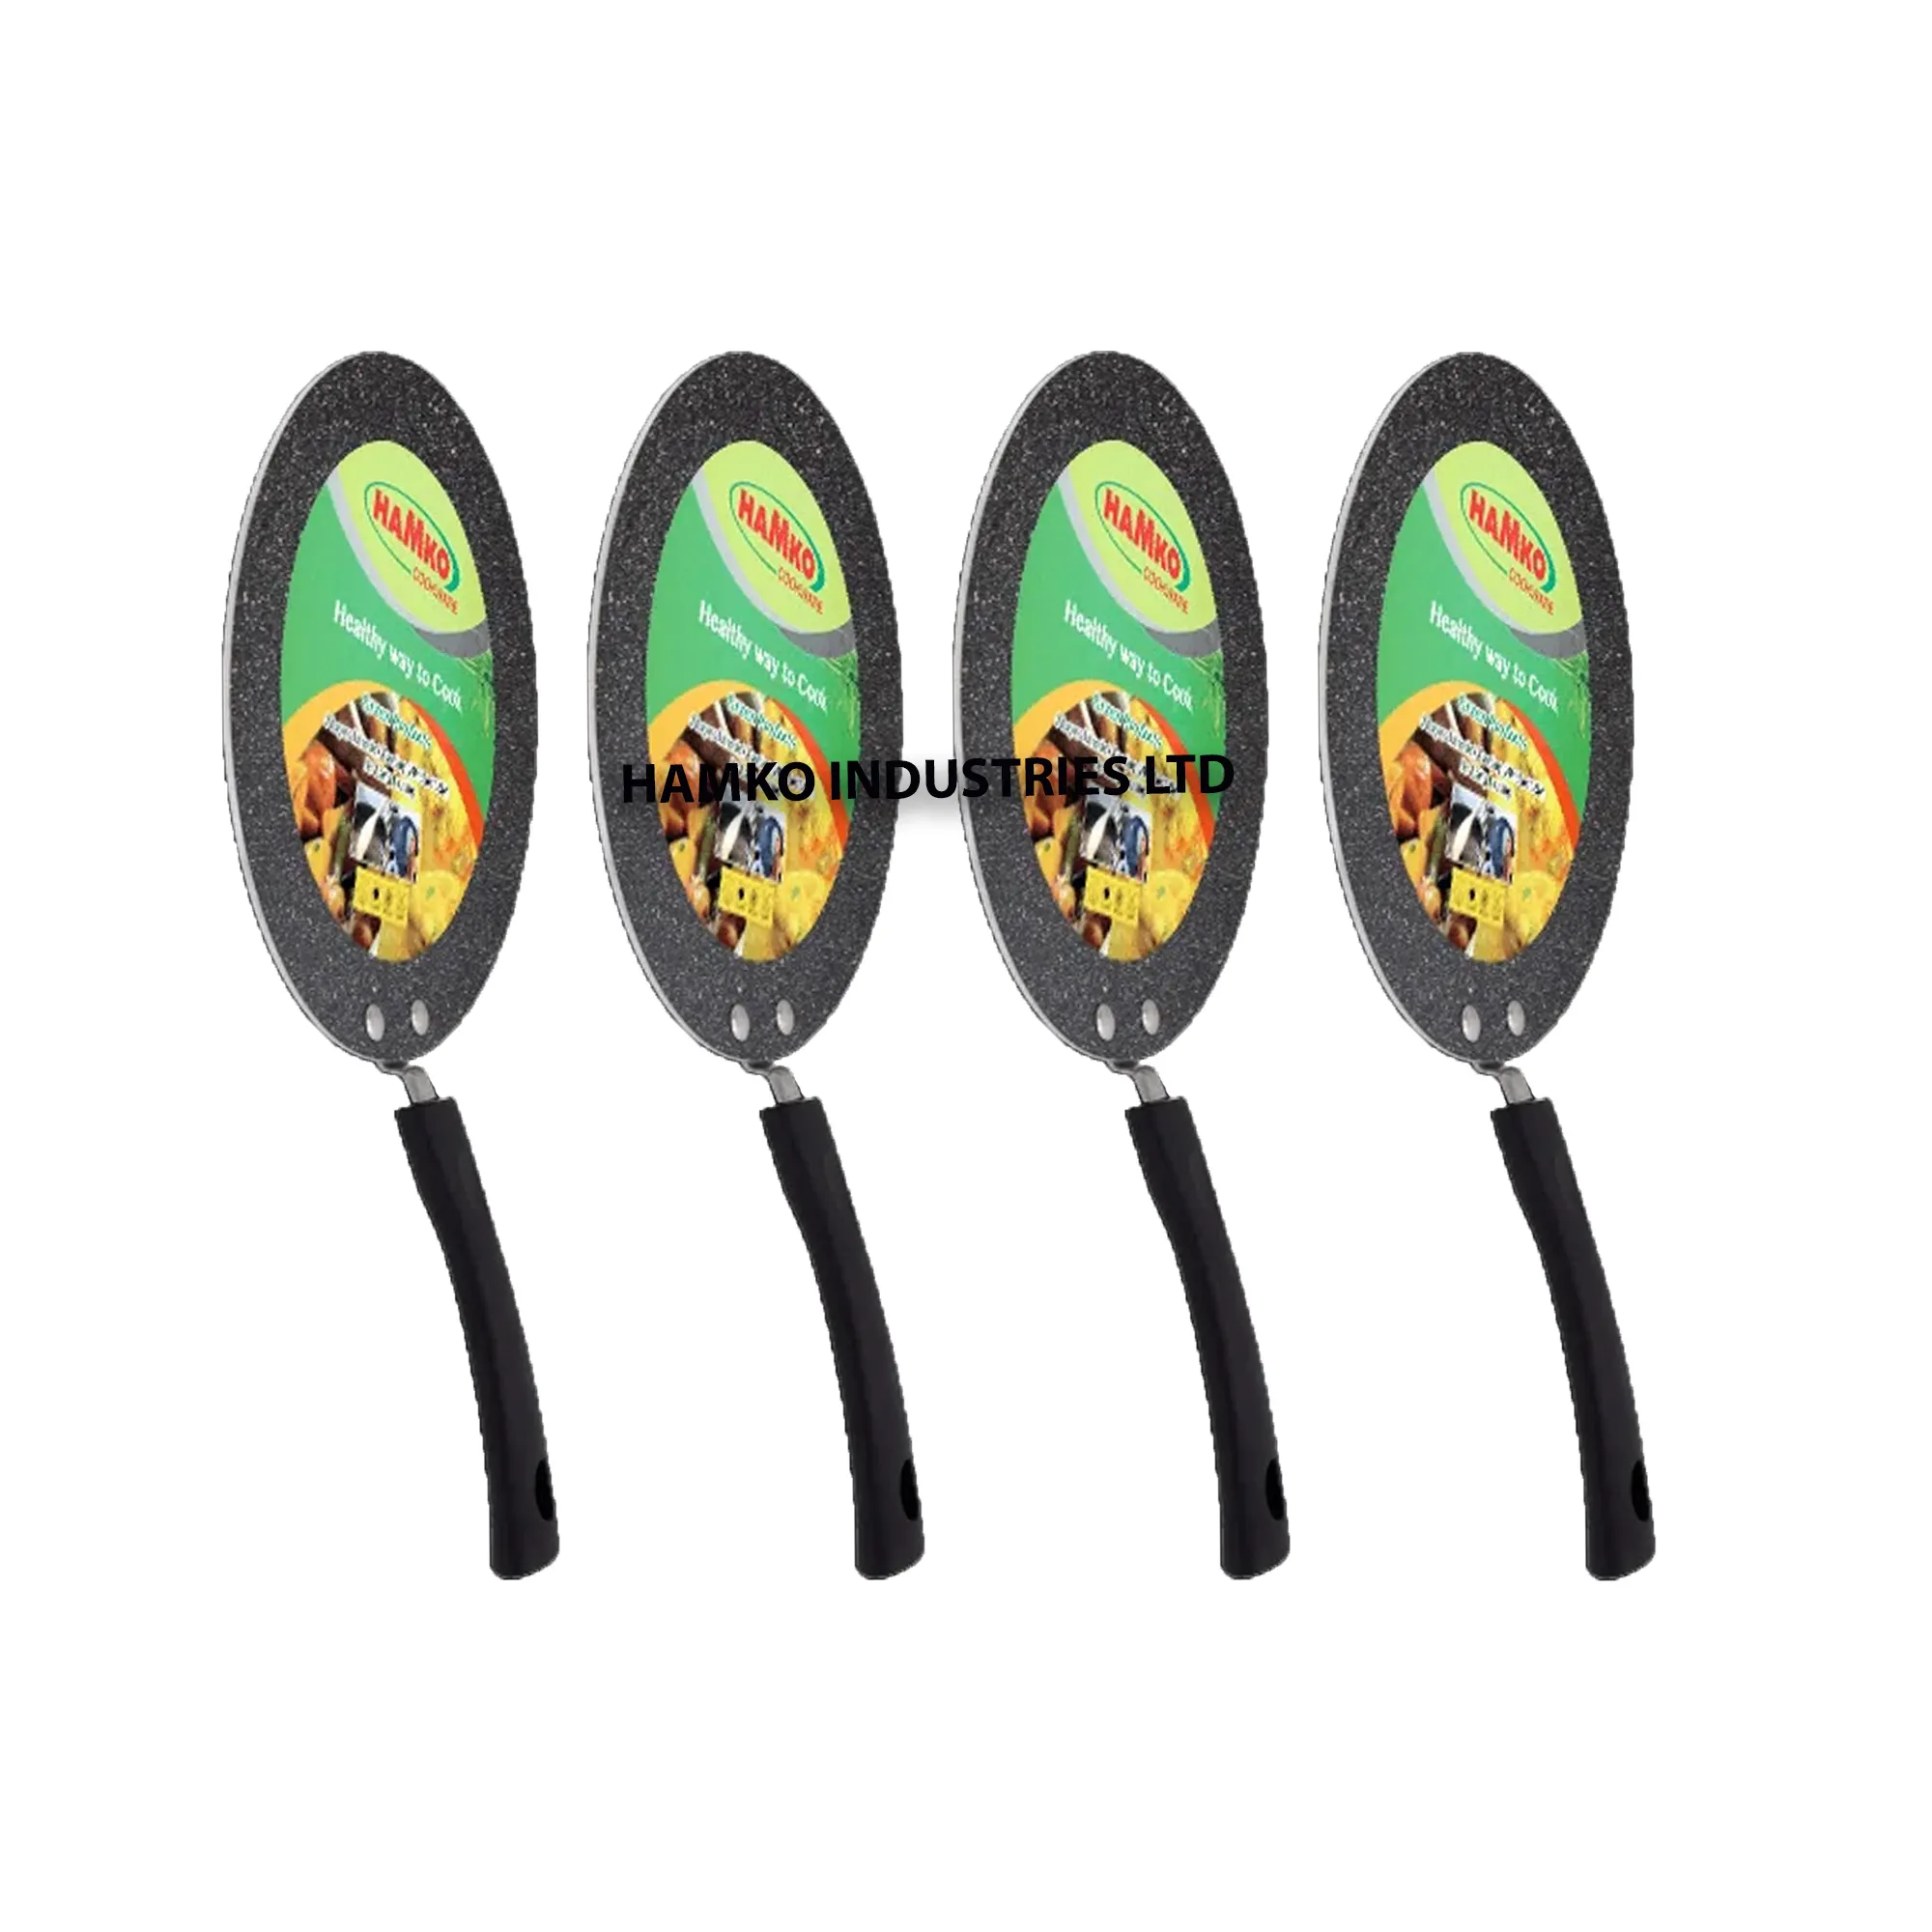 Premium Quality Export Oriented Uncoated Honeycomb Non-Stick Frying Pan With Modern Design Metal Handle Ruti Tawa For Bangladesh